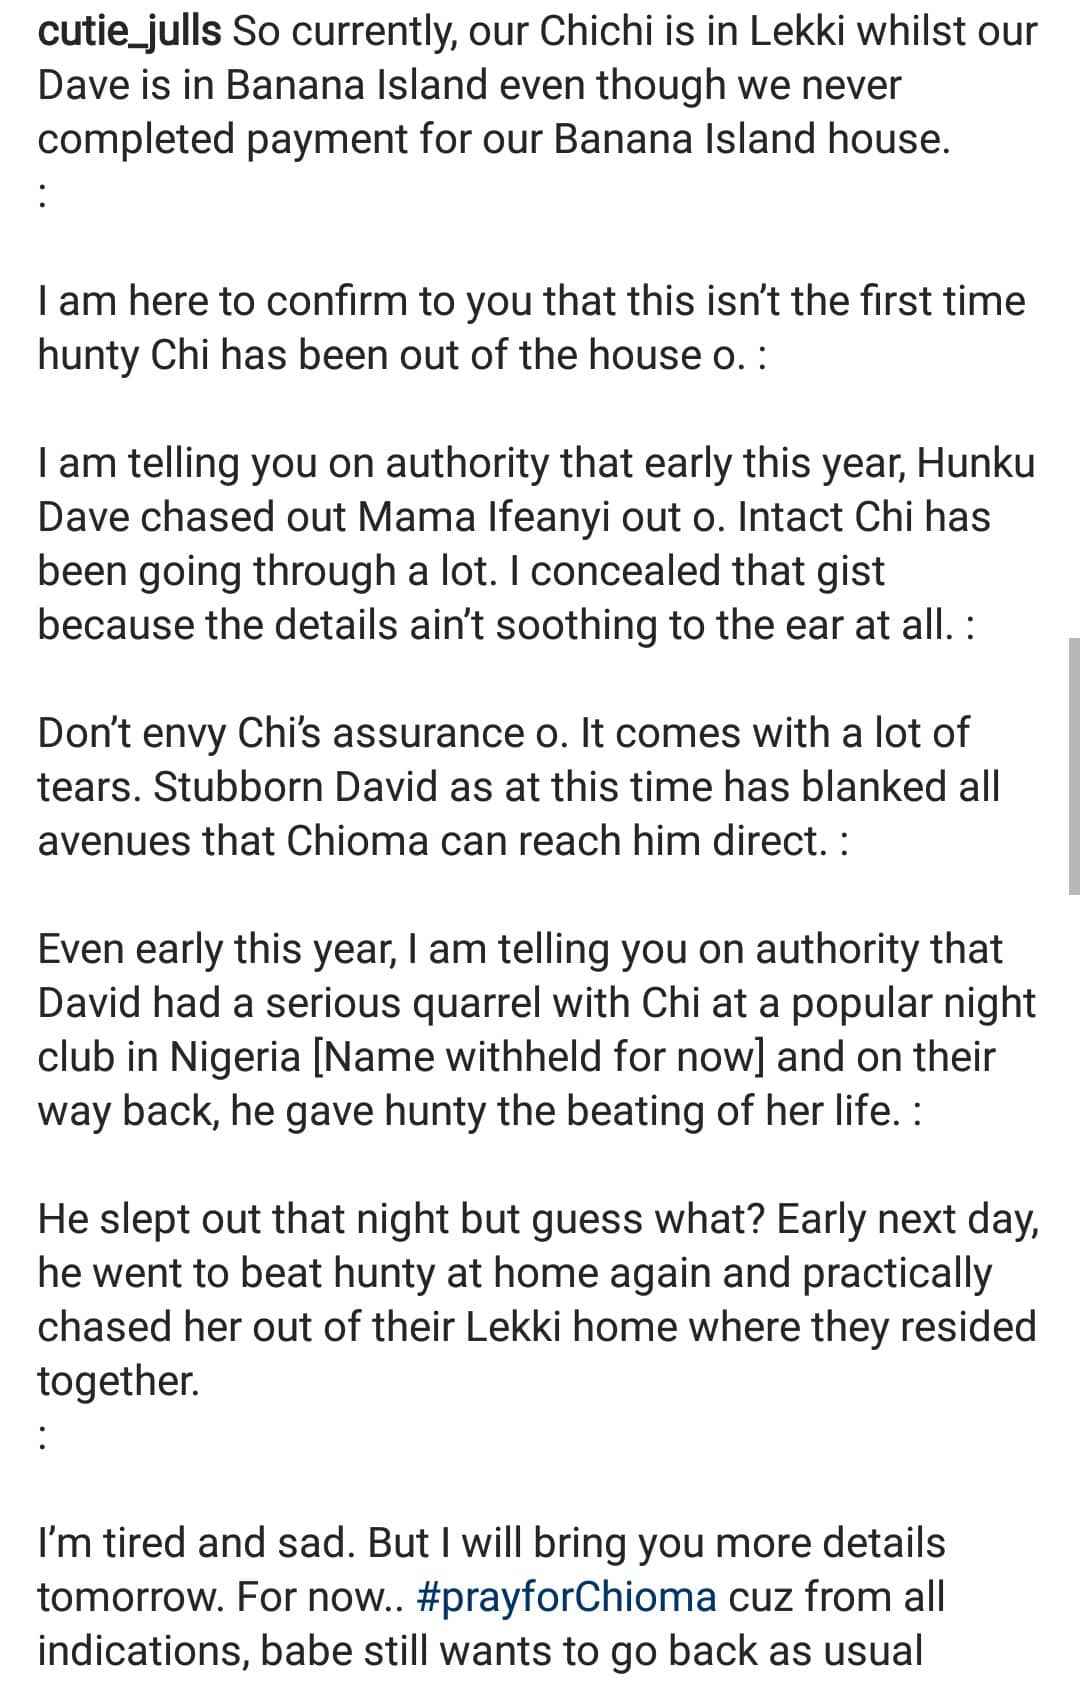 Chioma's Assurance Comes With Tears As Davido Is Accused Of Beating Up His Fiance  %Post Title